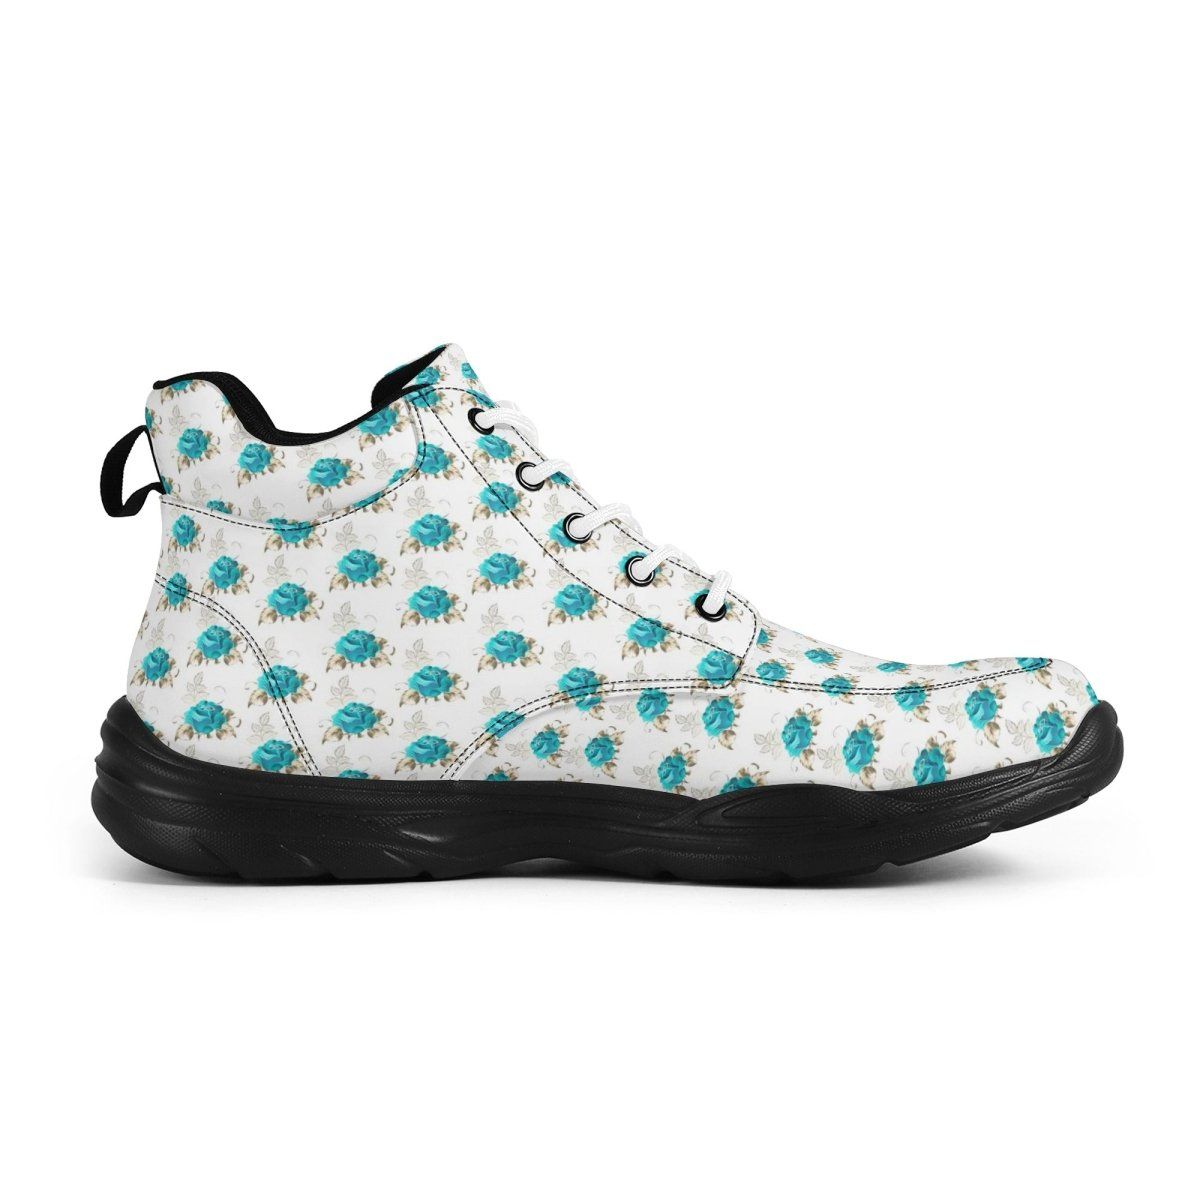 Womens Leather High Top Chunky Sneakers - Stylish and Durable - Iron Phoenix GHG